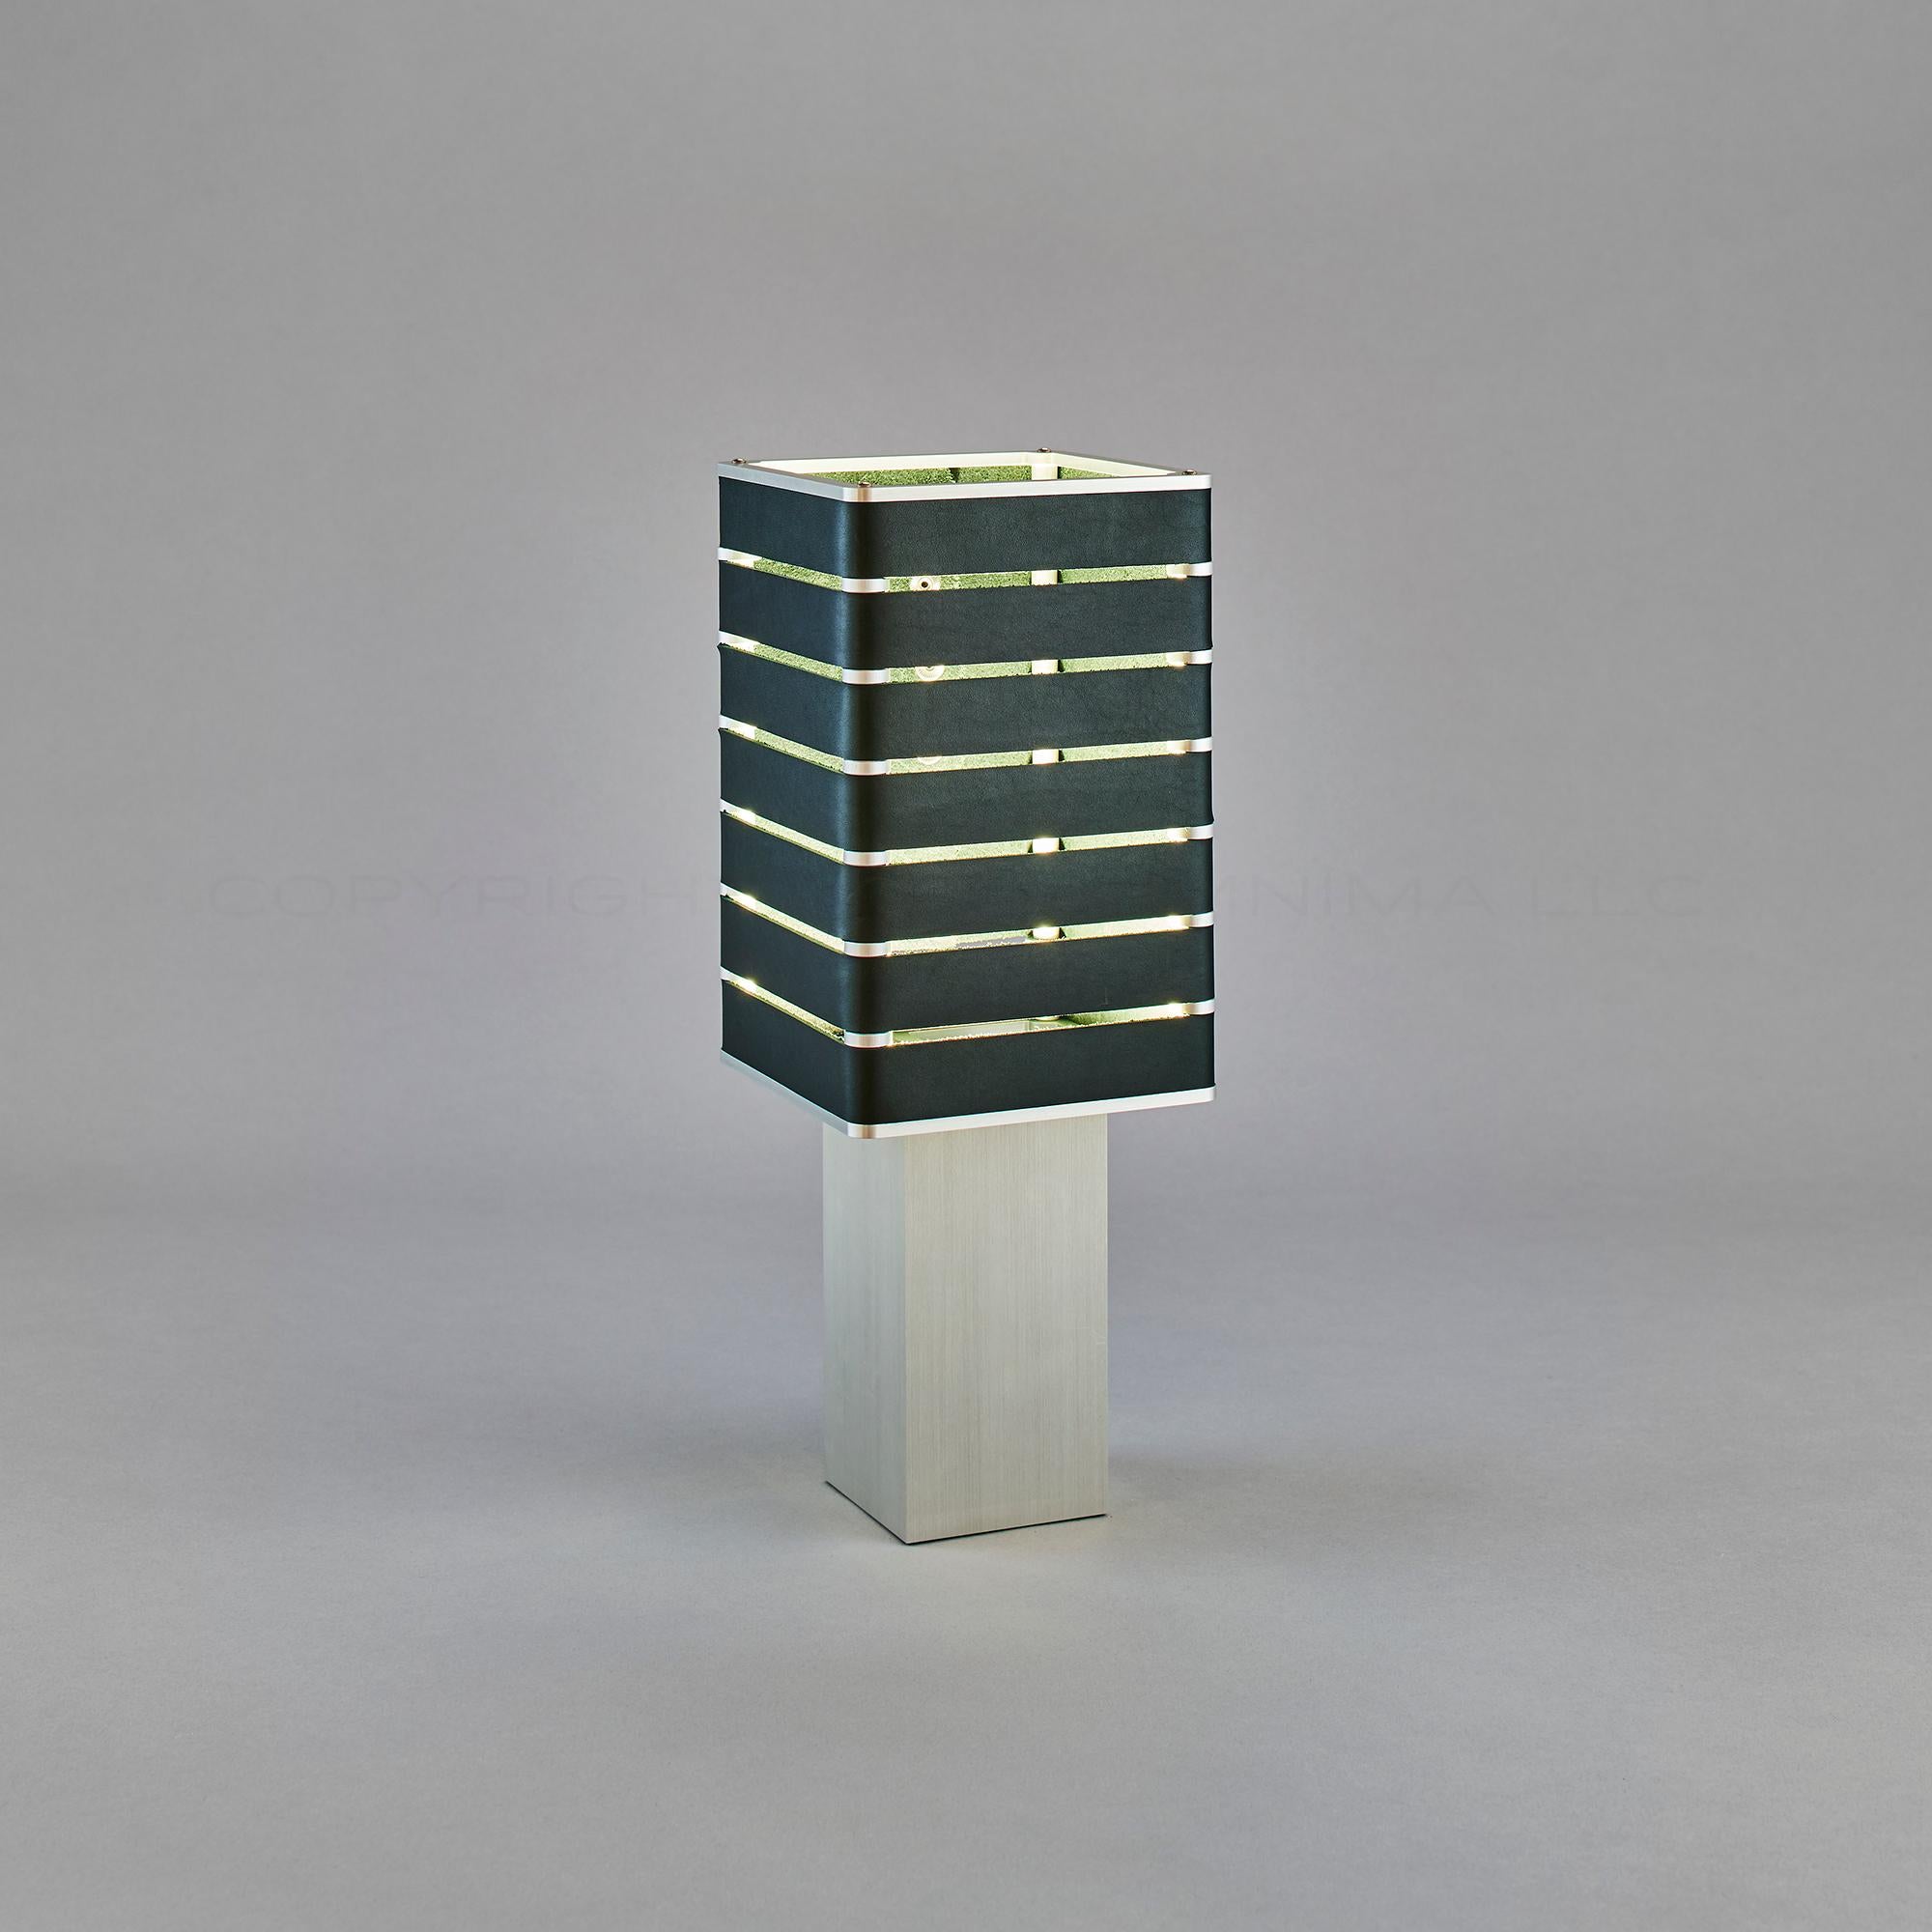 Machine-Made Modern, Minimal, Solid Metal Table Light in Verde Green Italian Leather